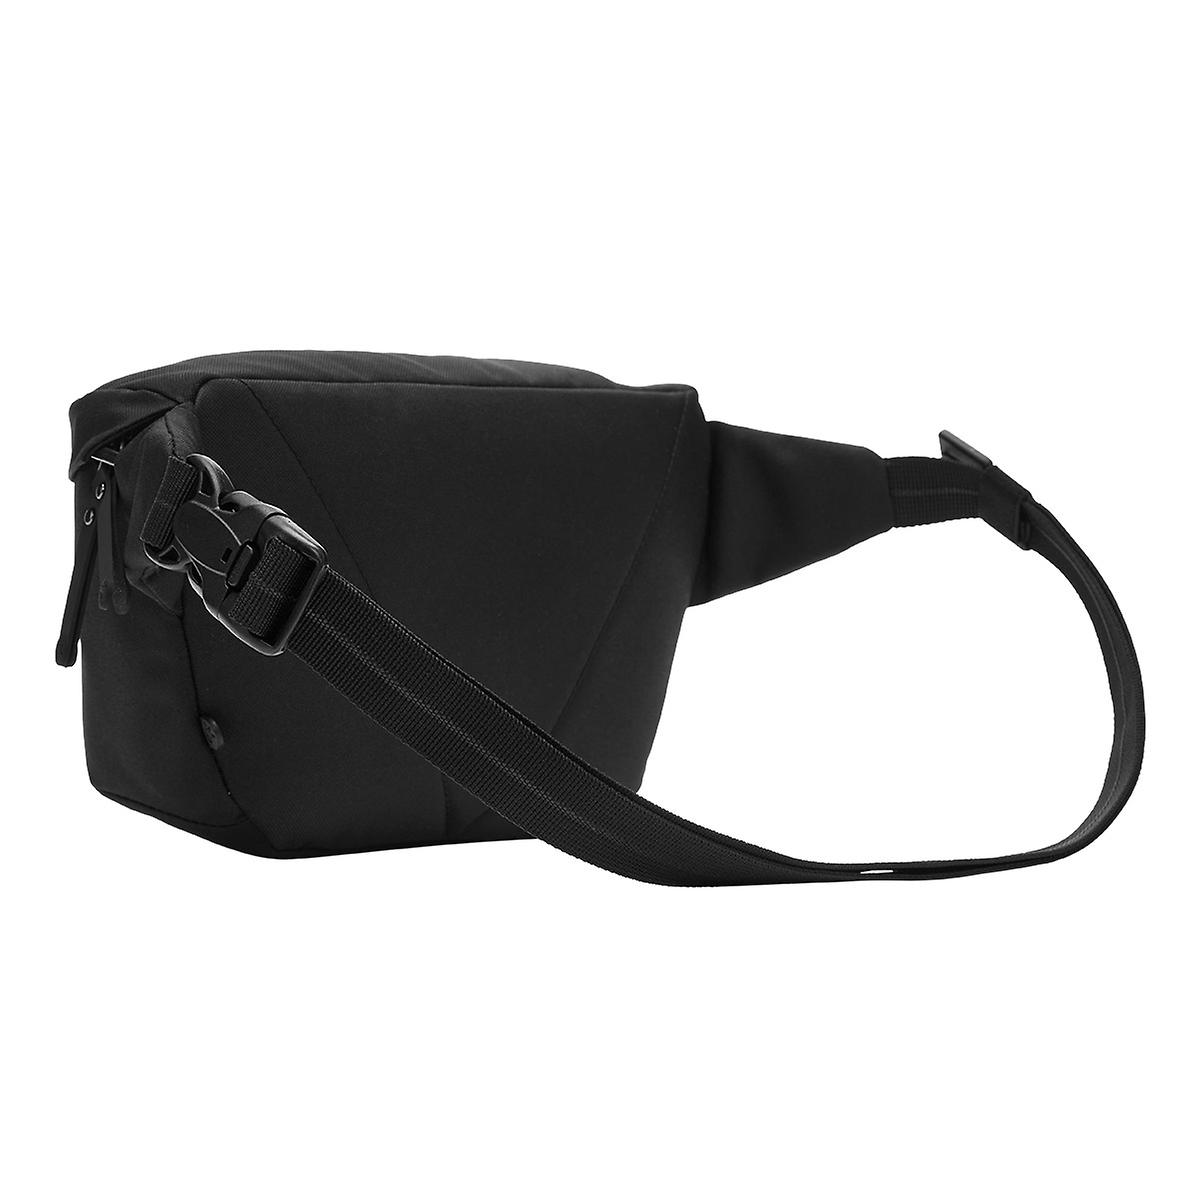 Pacsafe Black Go Sling Pack | The Container Store